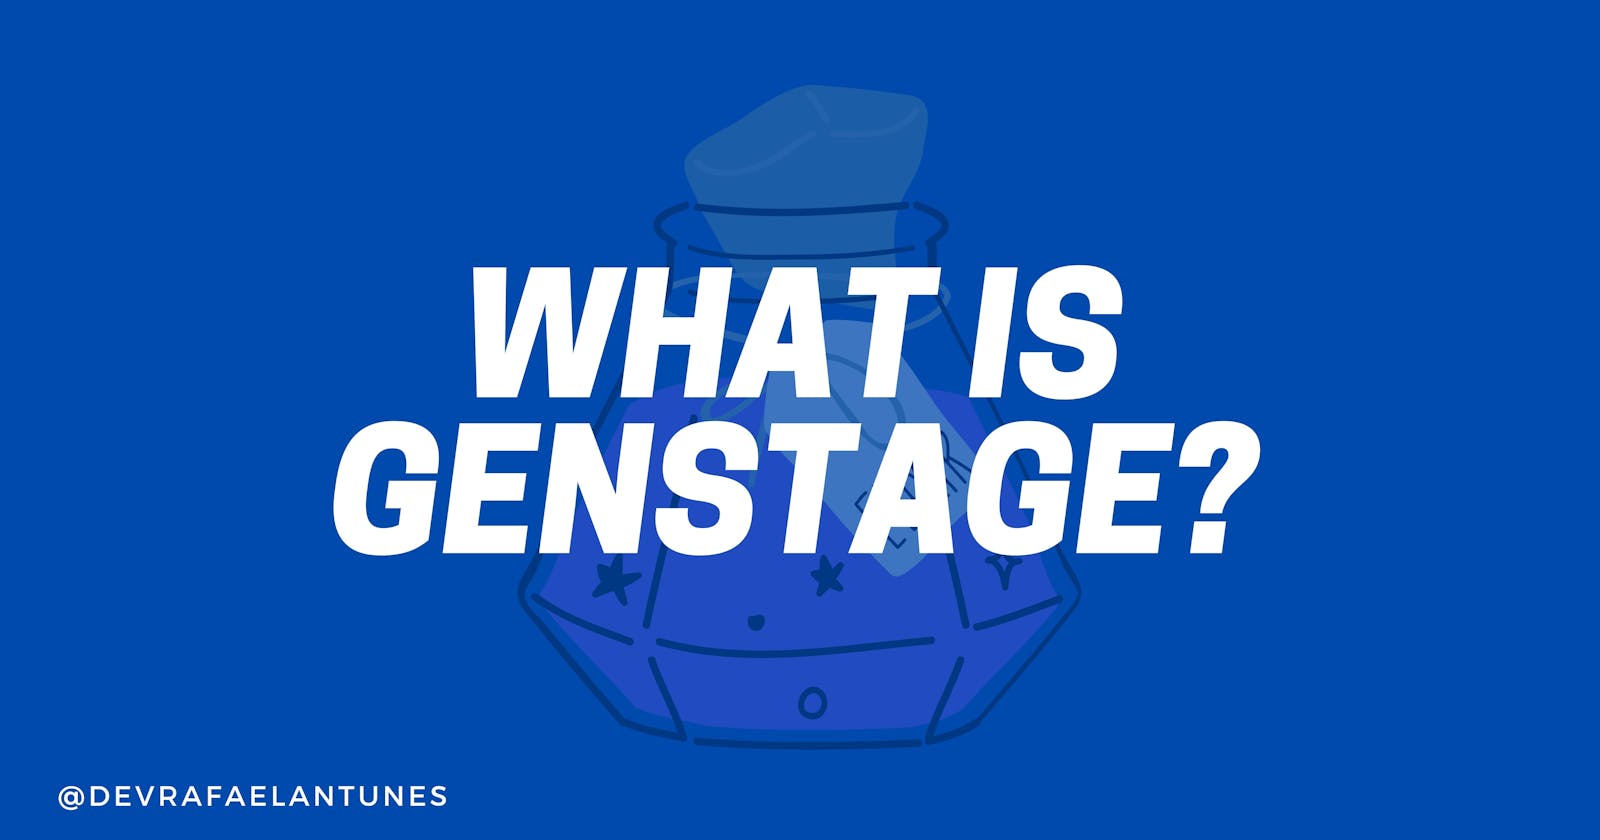 What is GenStage?